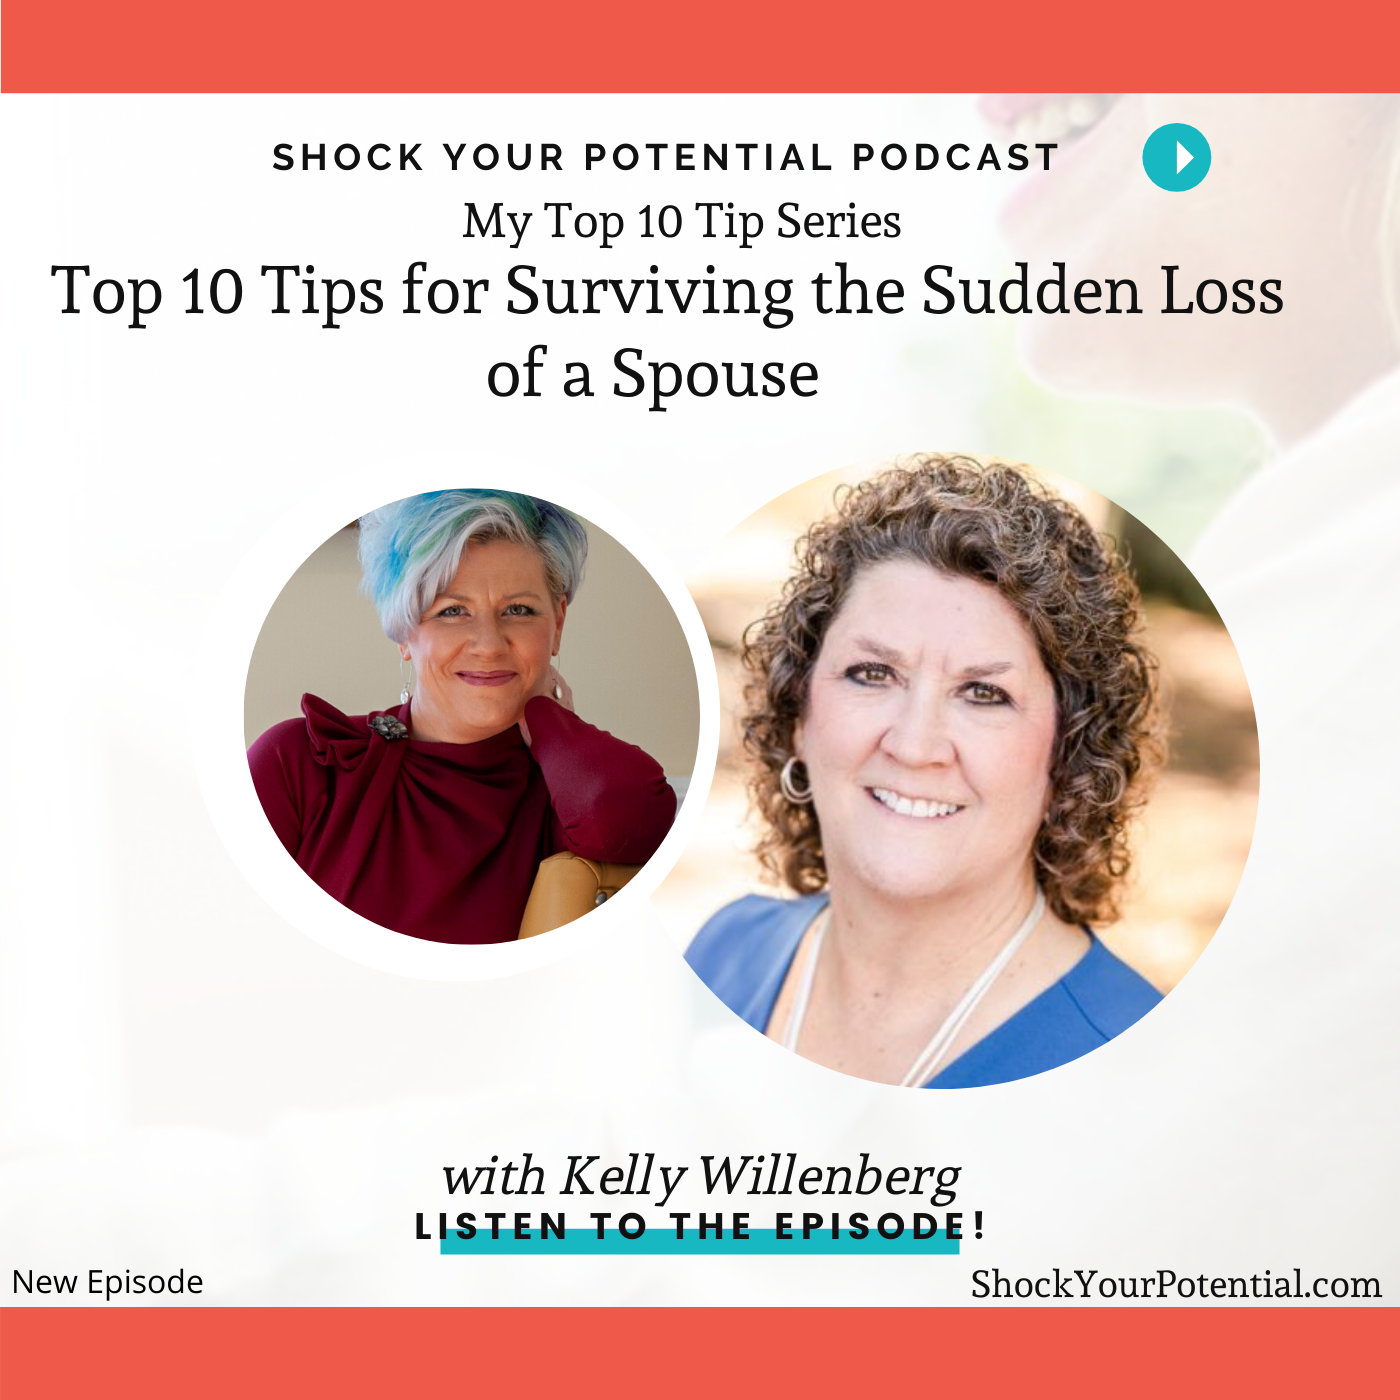 Top 10 Tips for Surviving the Sudden Loss of a Spouse – Kelly Willenberg